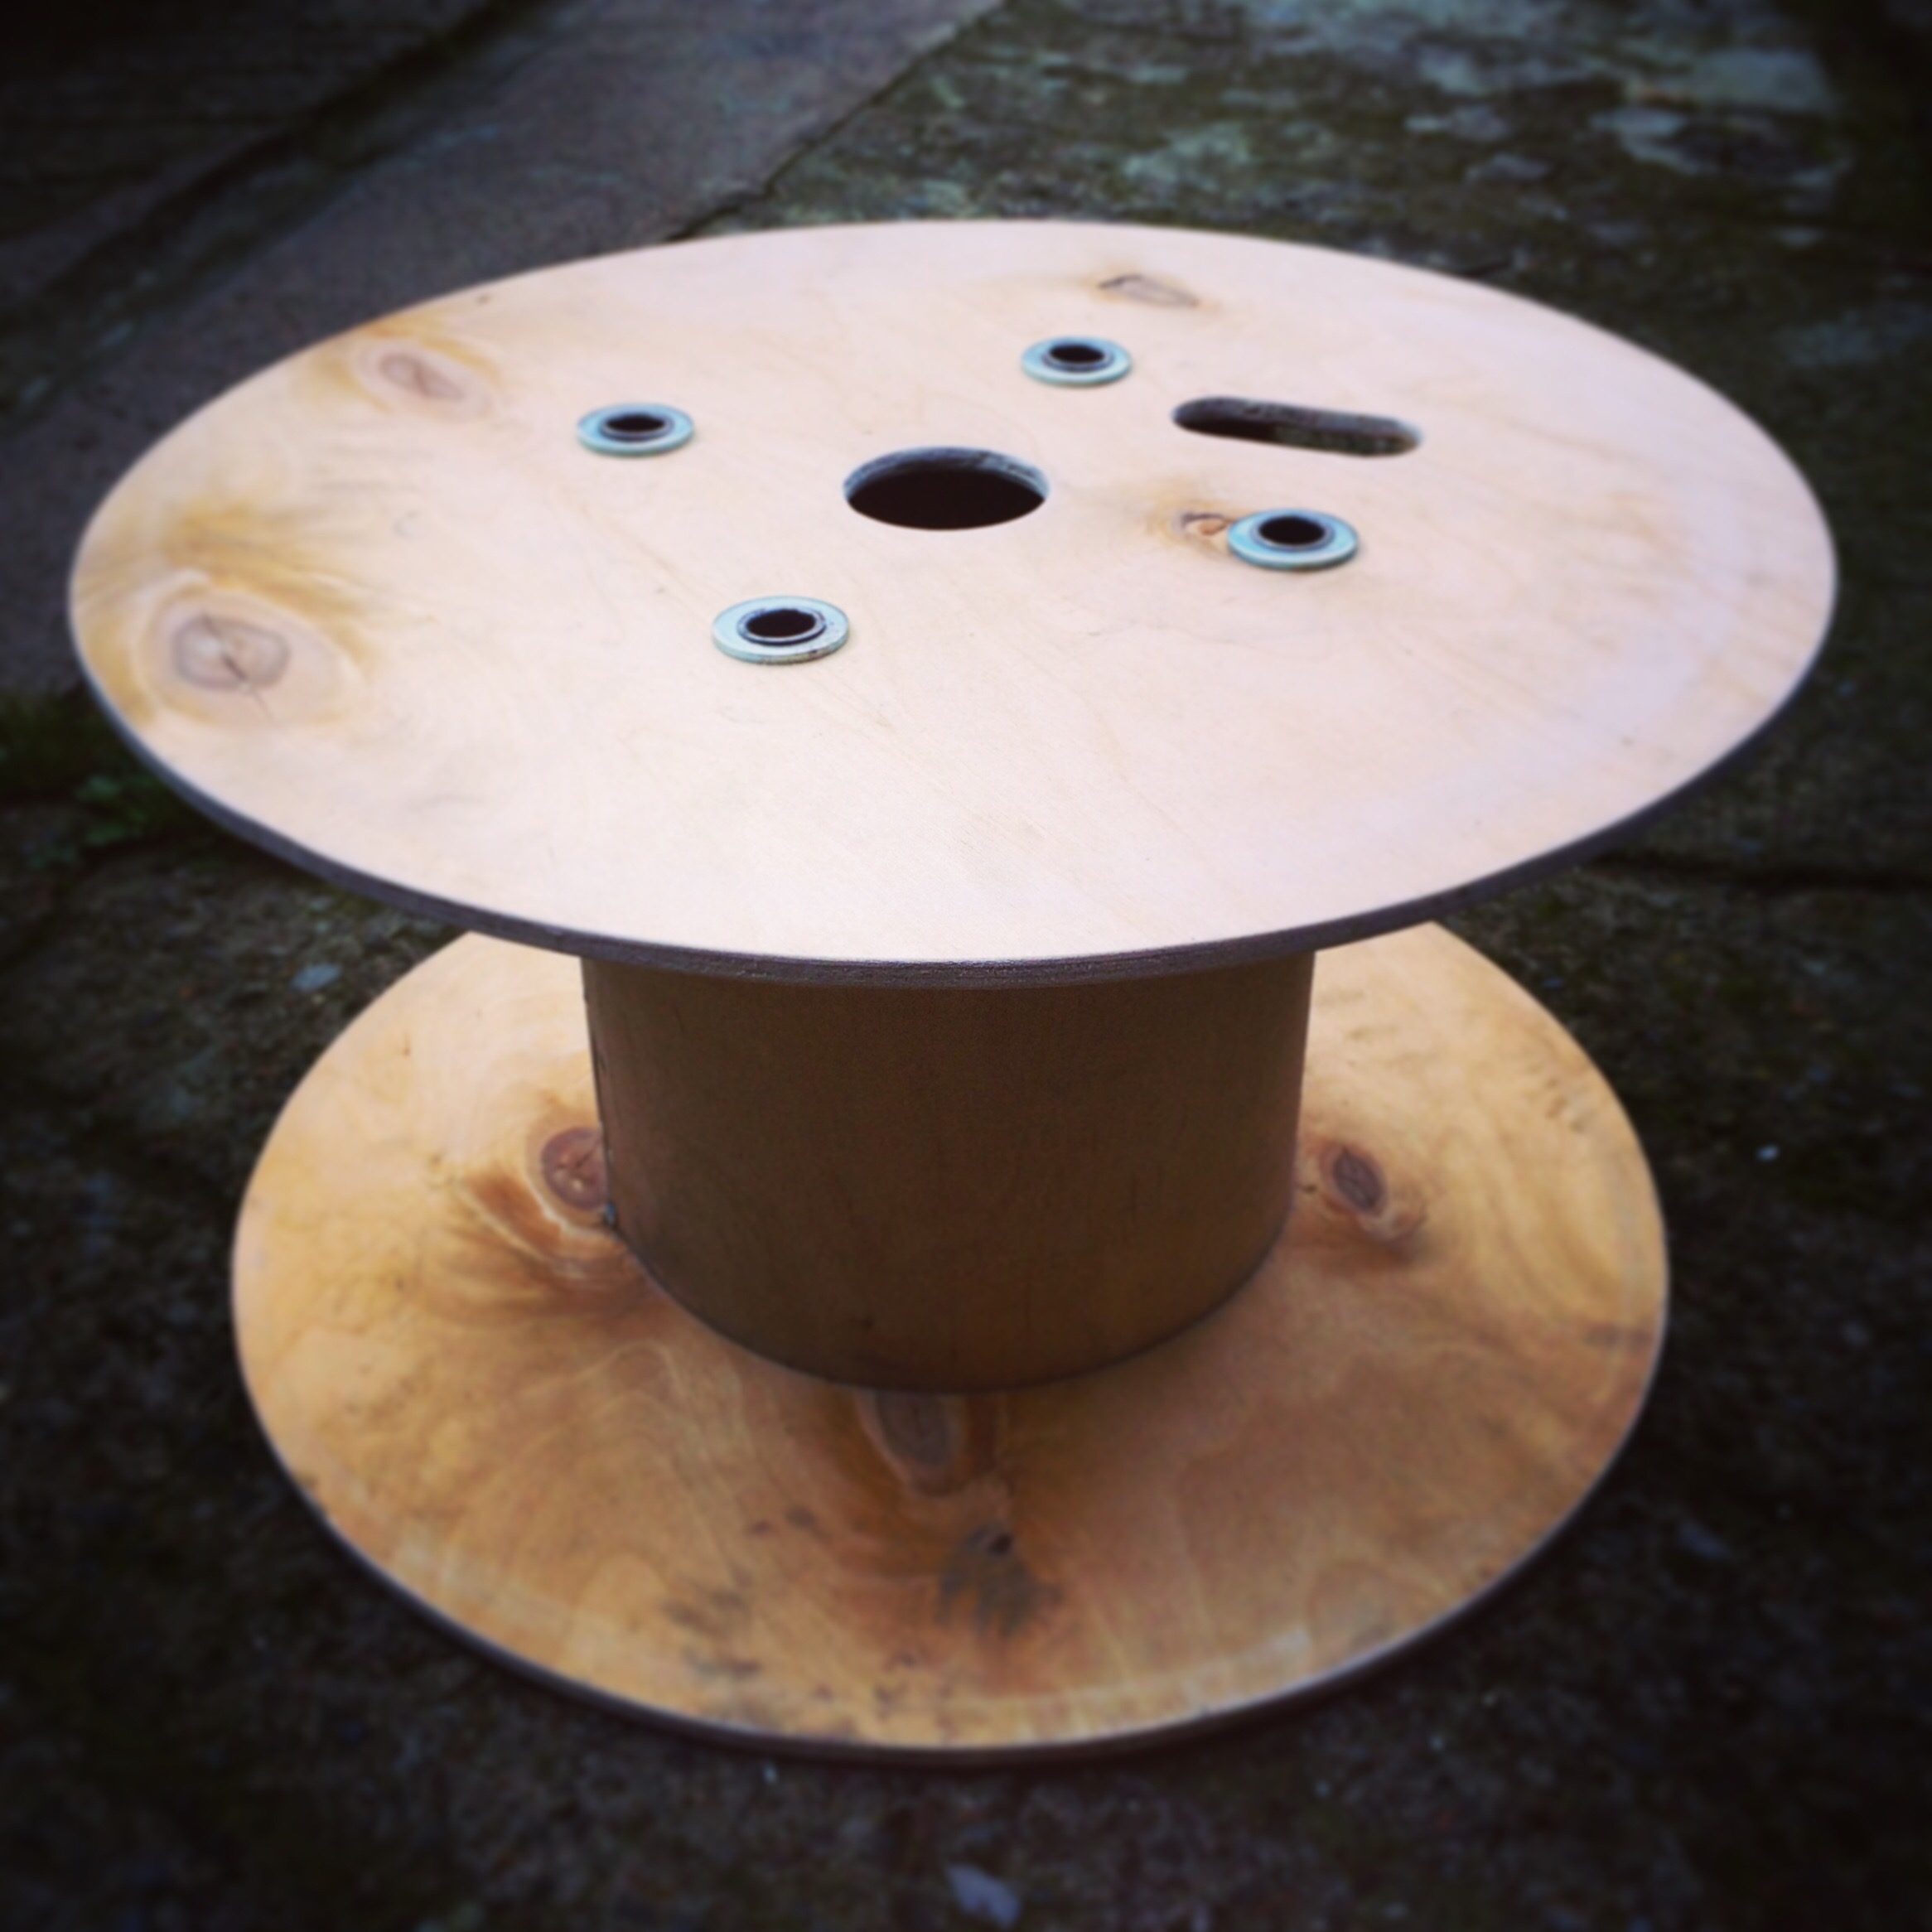 Cable reel play table – All round creative junkie